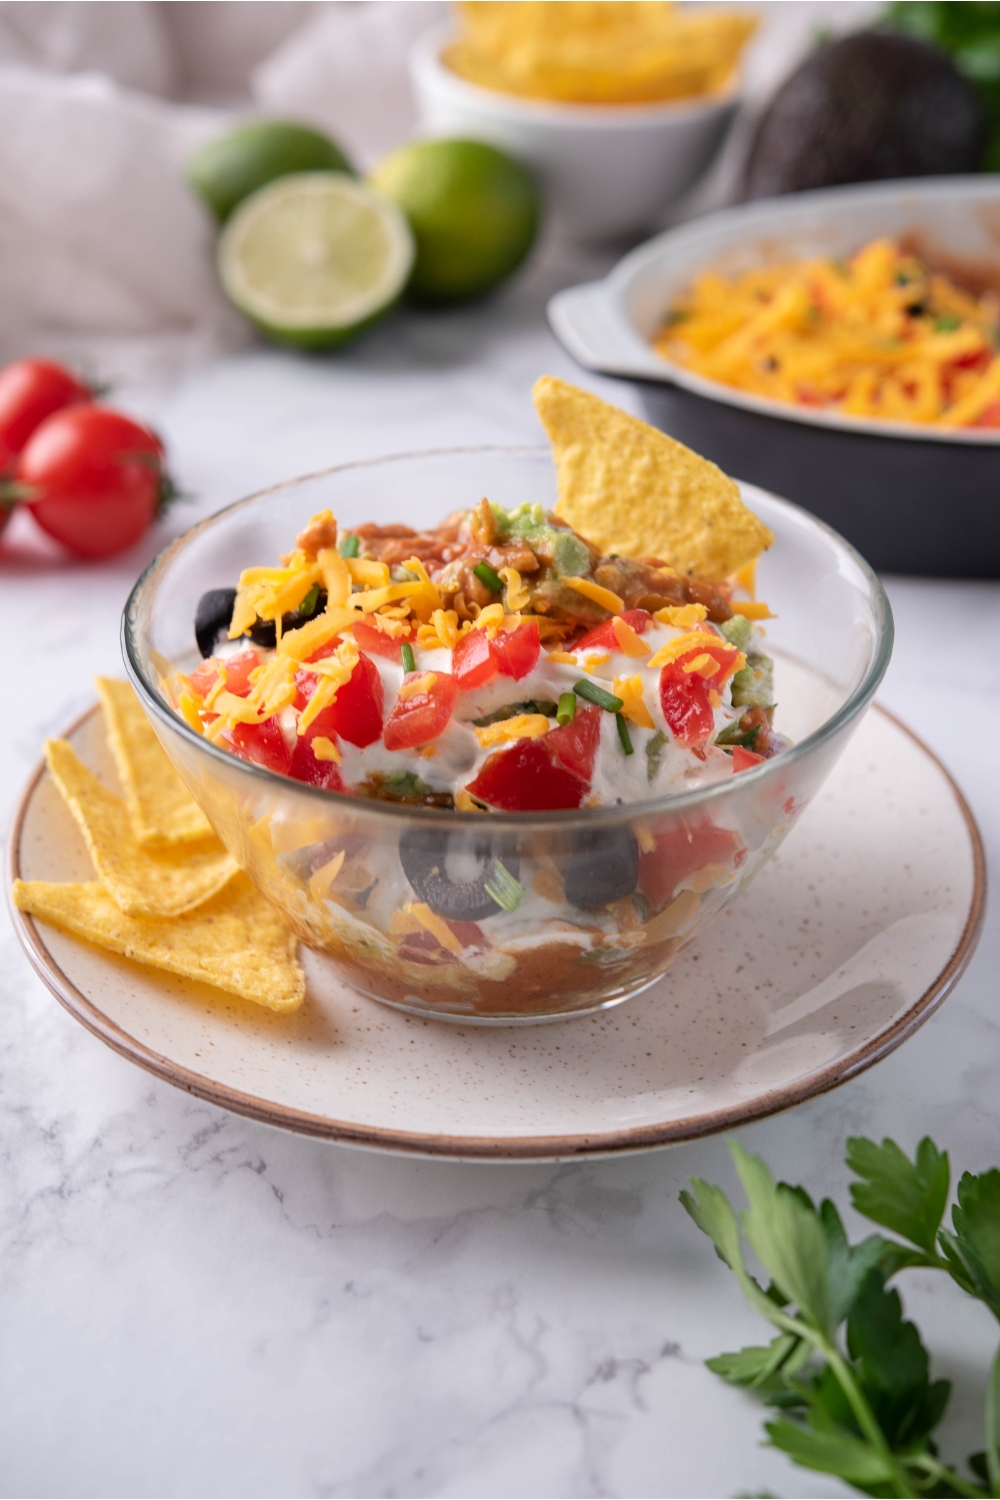 7 layer dip in a clear bowl atop a brown-rimmed plate, with one tortilla chip in the bowl and three more chips on the plate. In the background is the rest of the dip, cherry tomatoes, limes, and a bowl of tortilla chips.